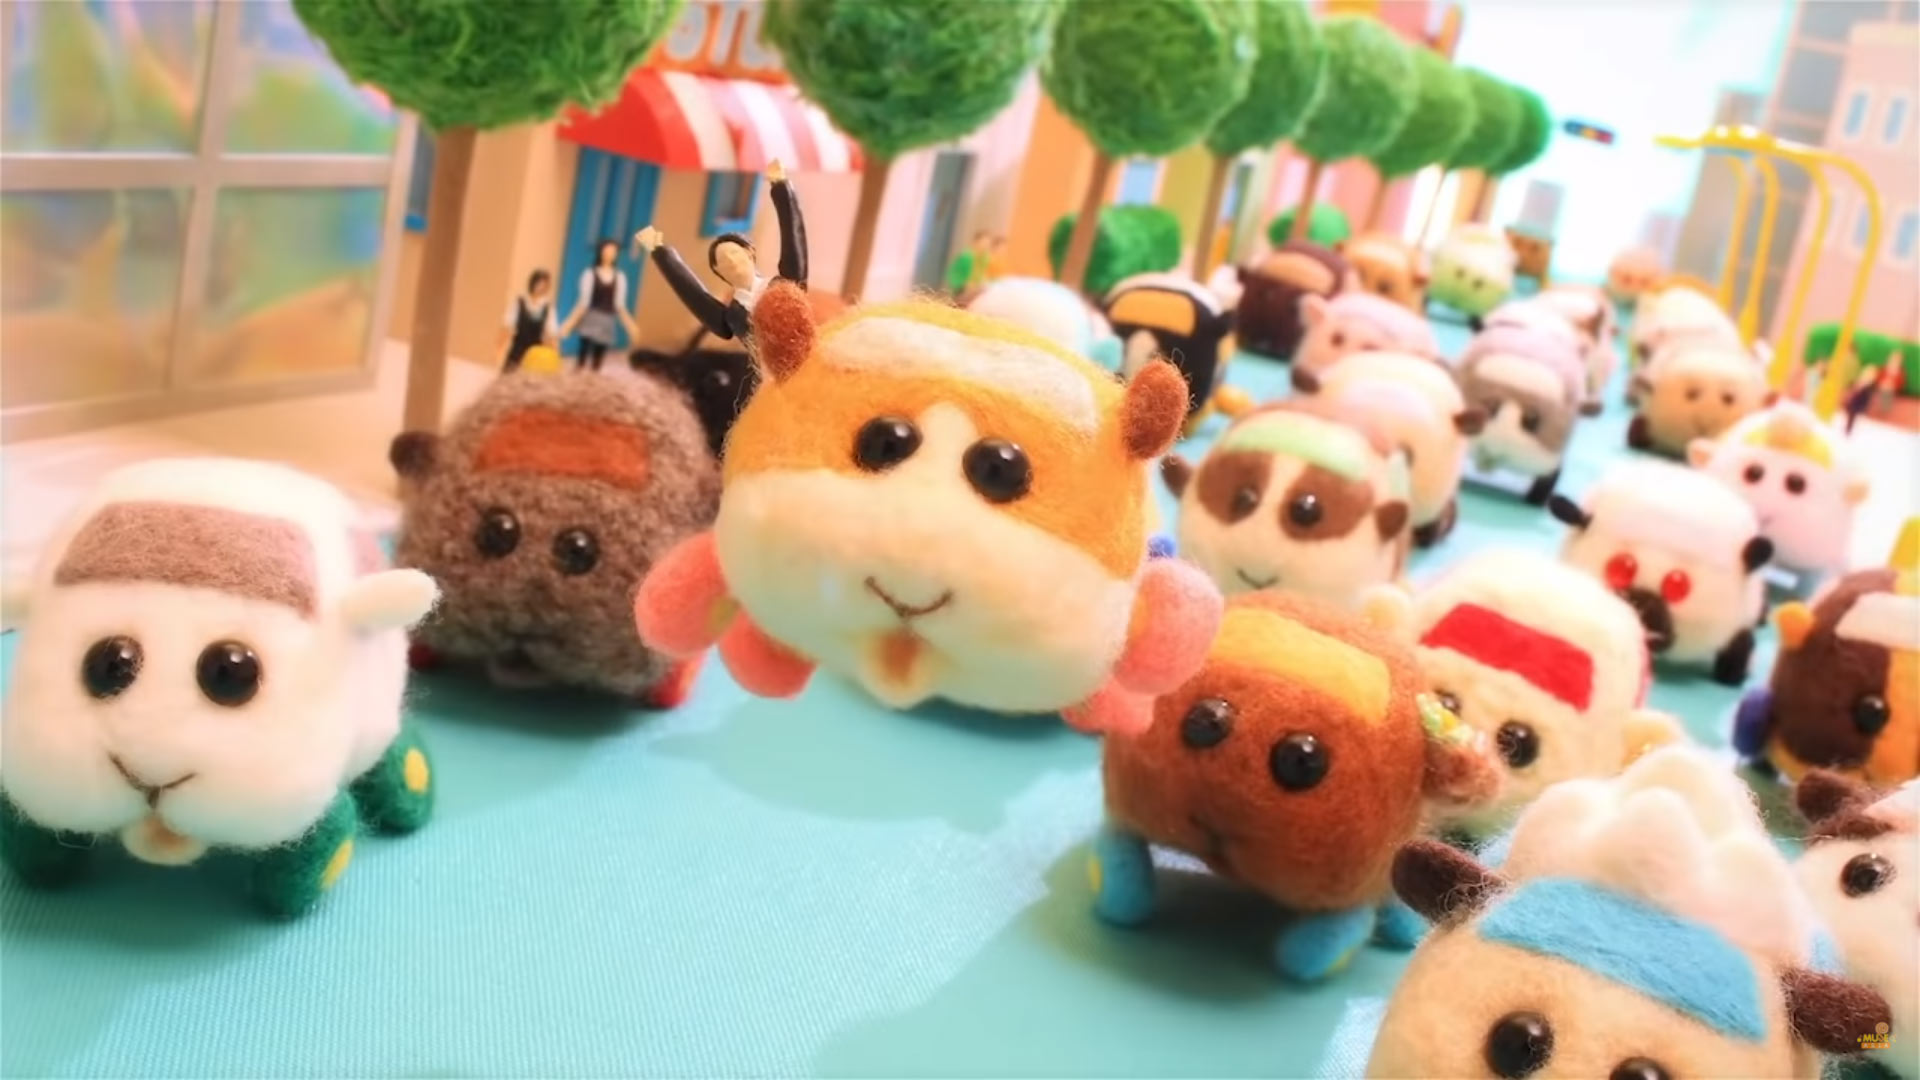 A crowd of Molcars, plush guinea pig cars, rushing toward the camera. The orange and white one is leaping up happily.